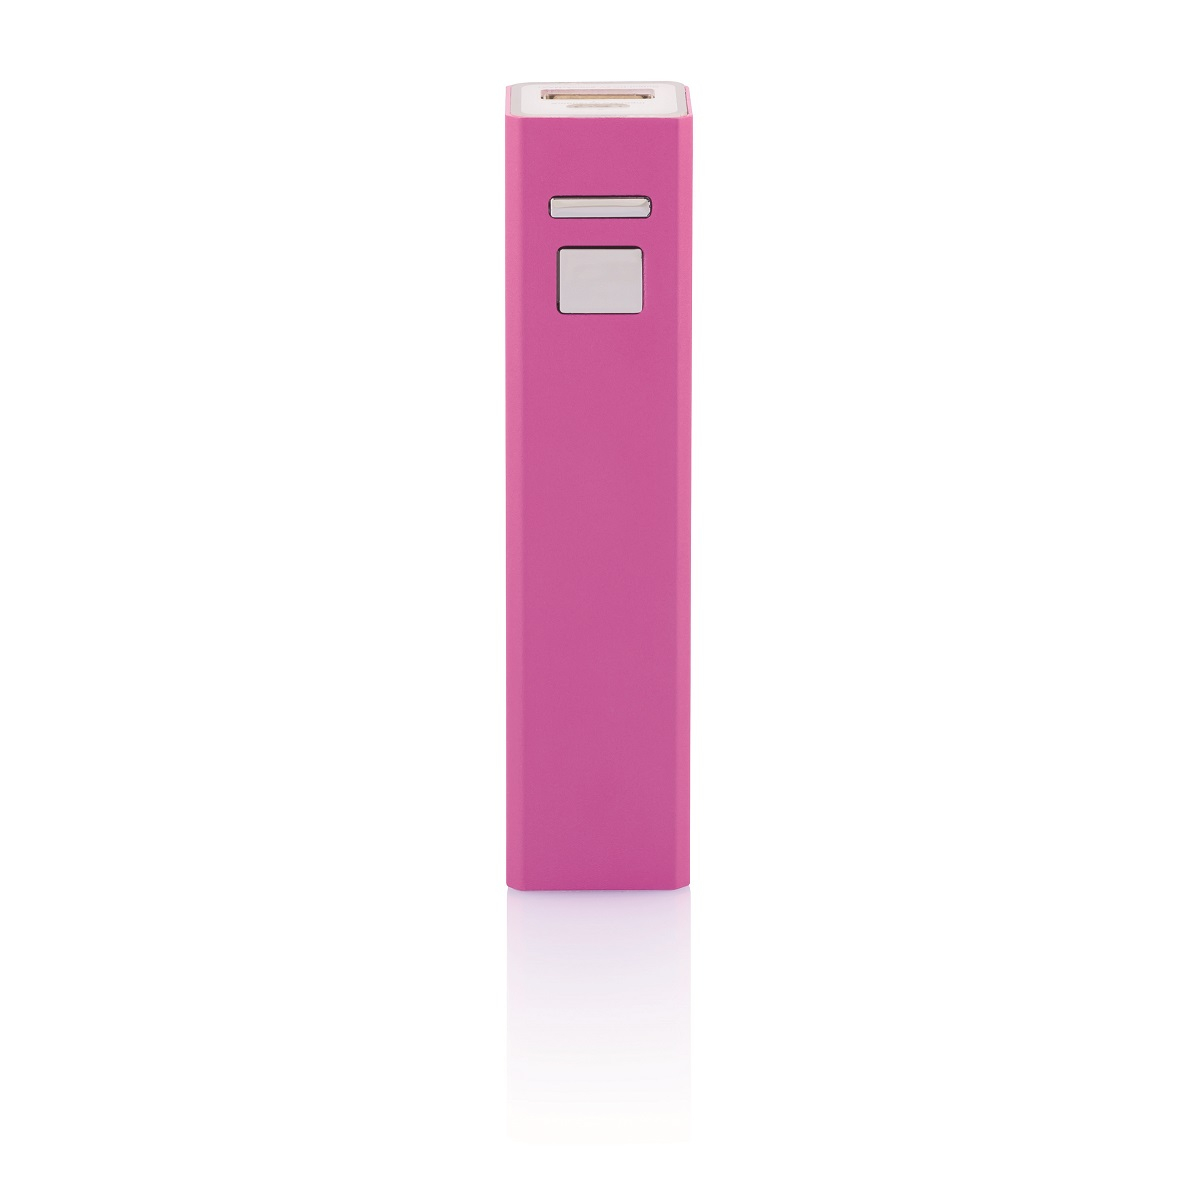 Image of Backup Battery in Pink